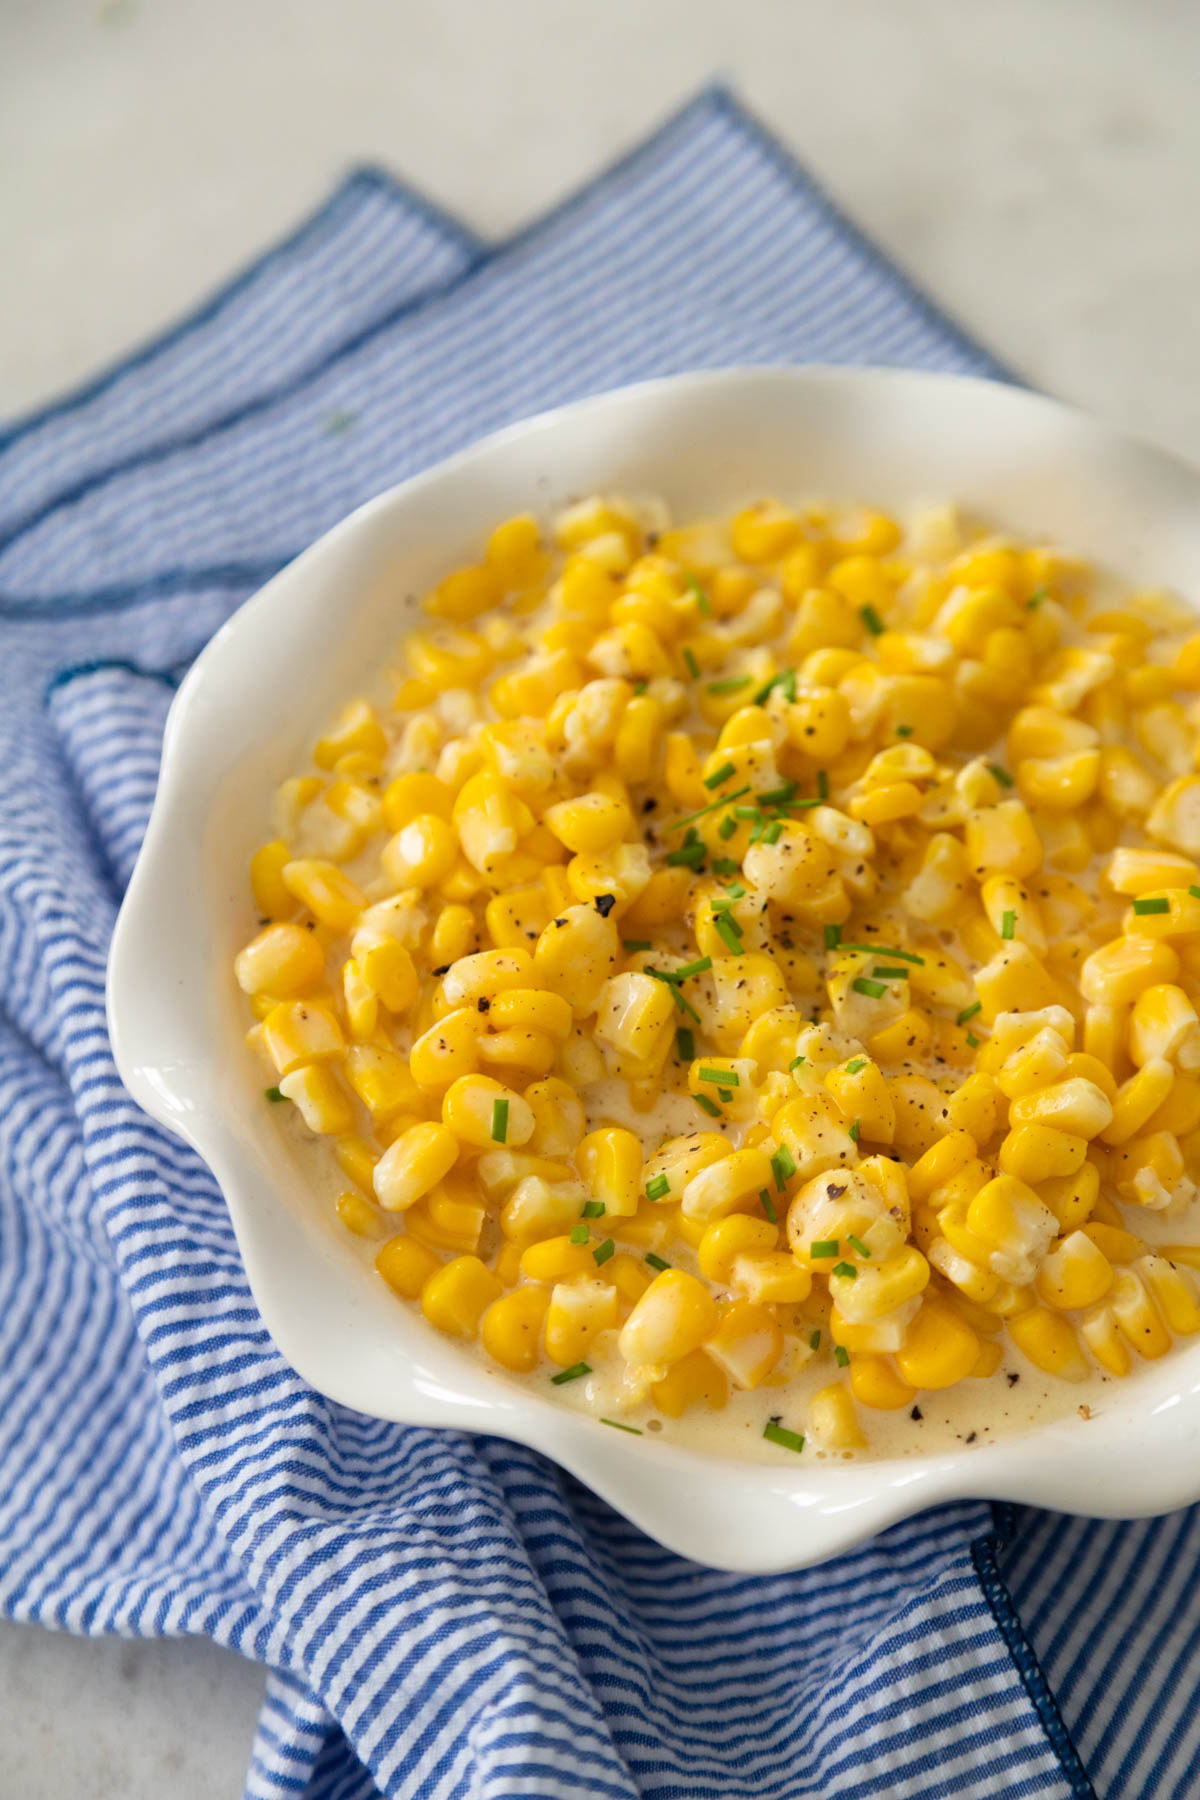 The serving bowl is filled with creamed corn and sits on a blue napkin.